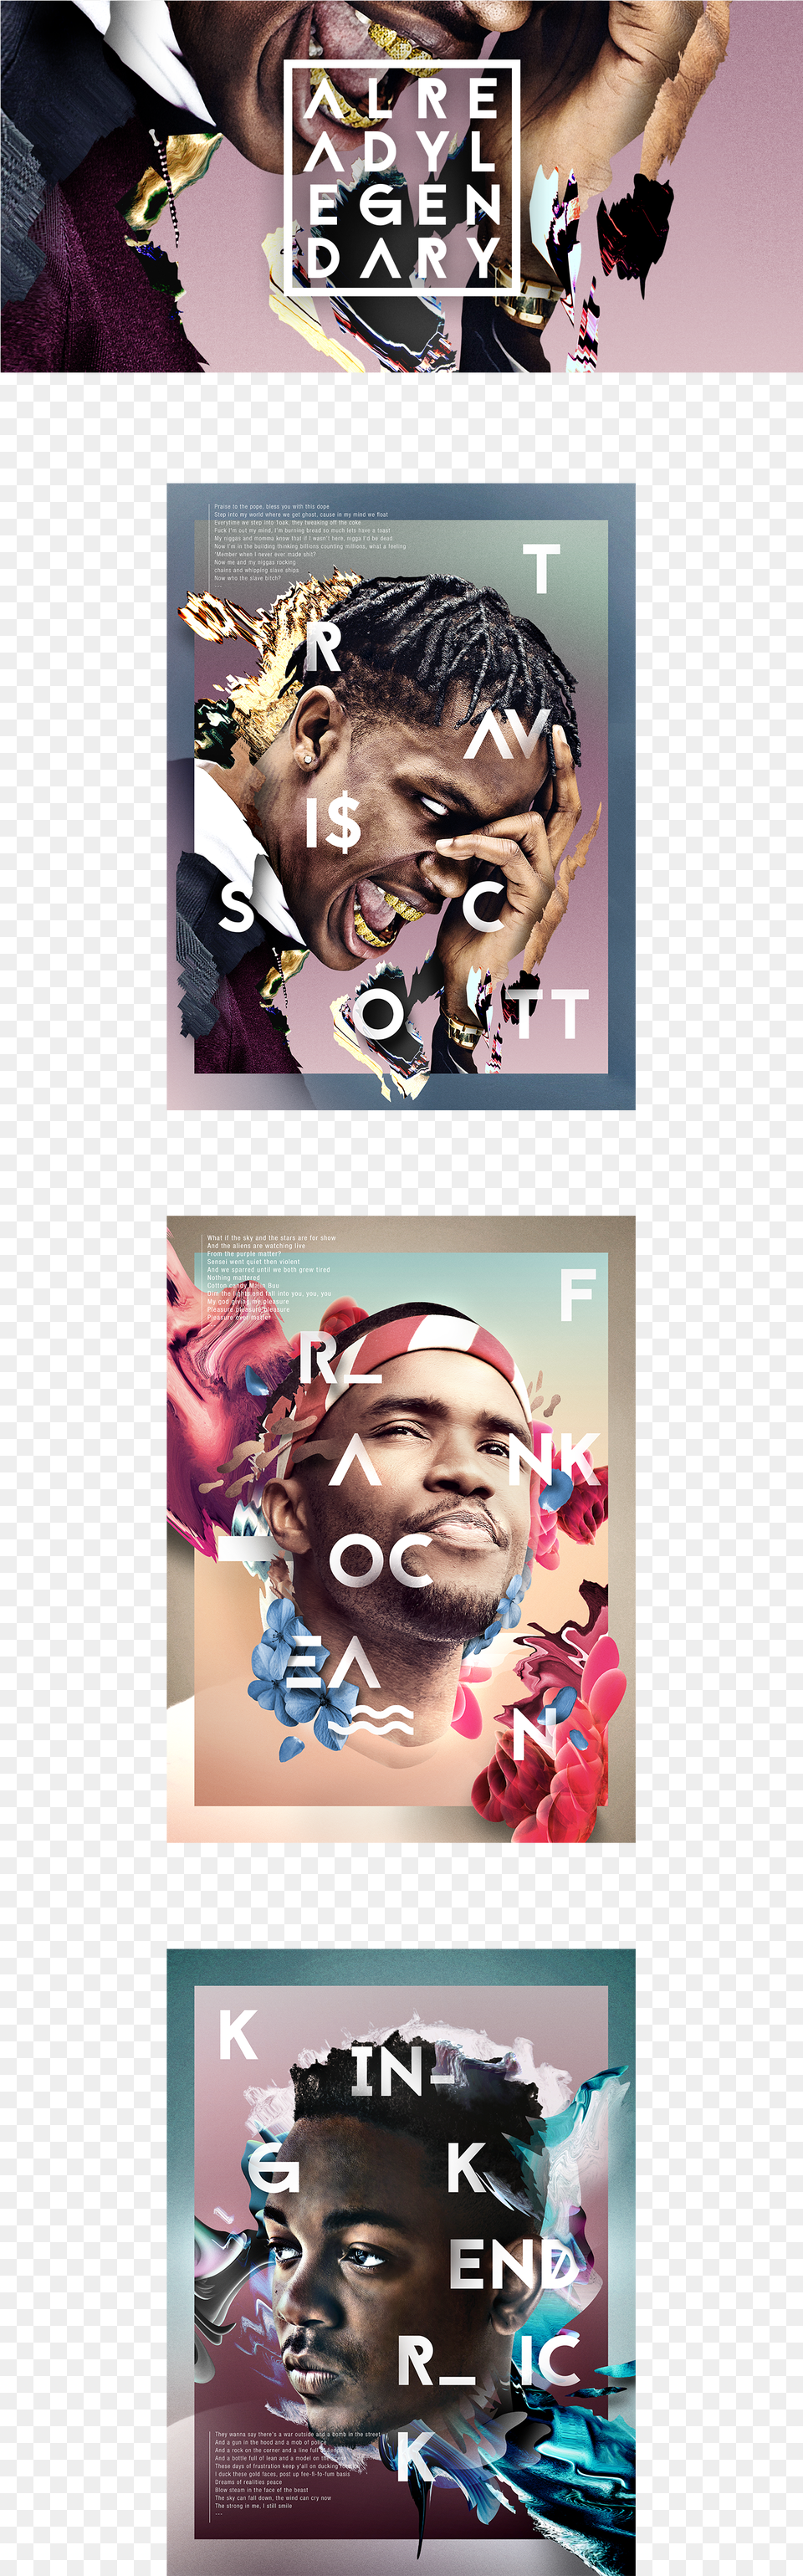 Portraits Found On Google So A Little Shout Out To Collage Png Image